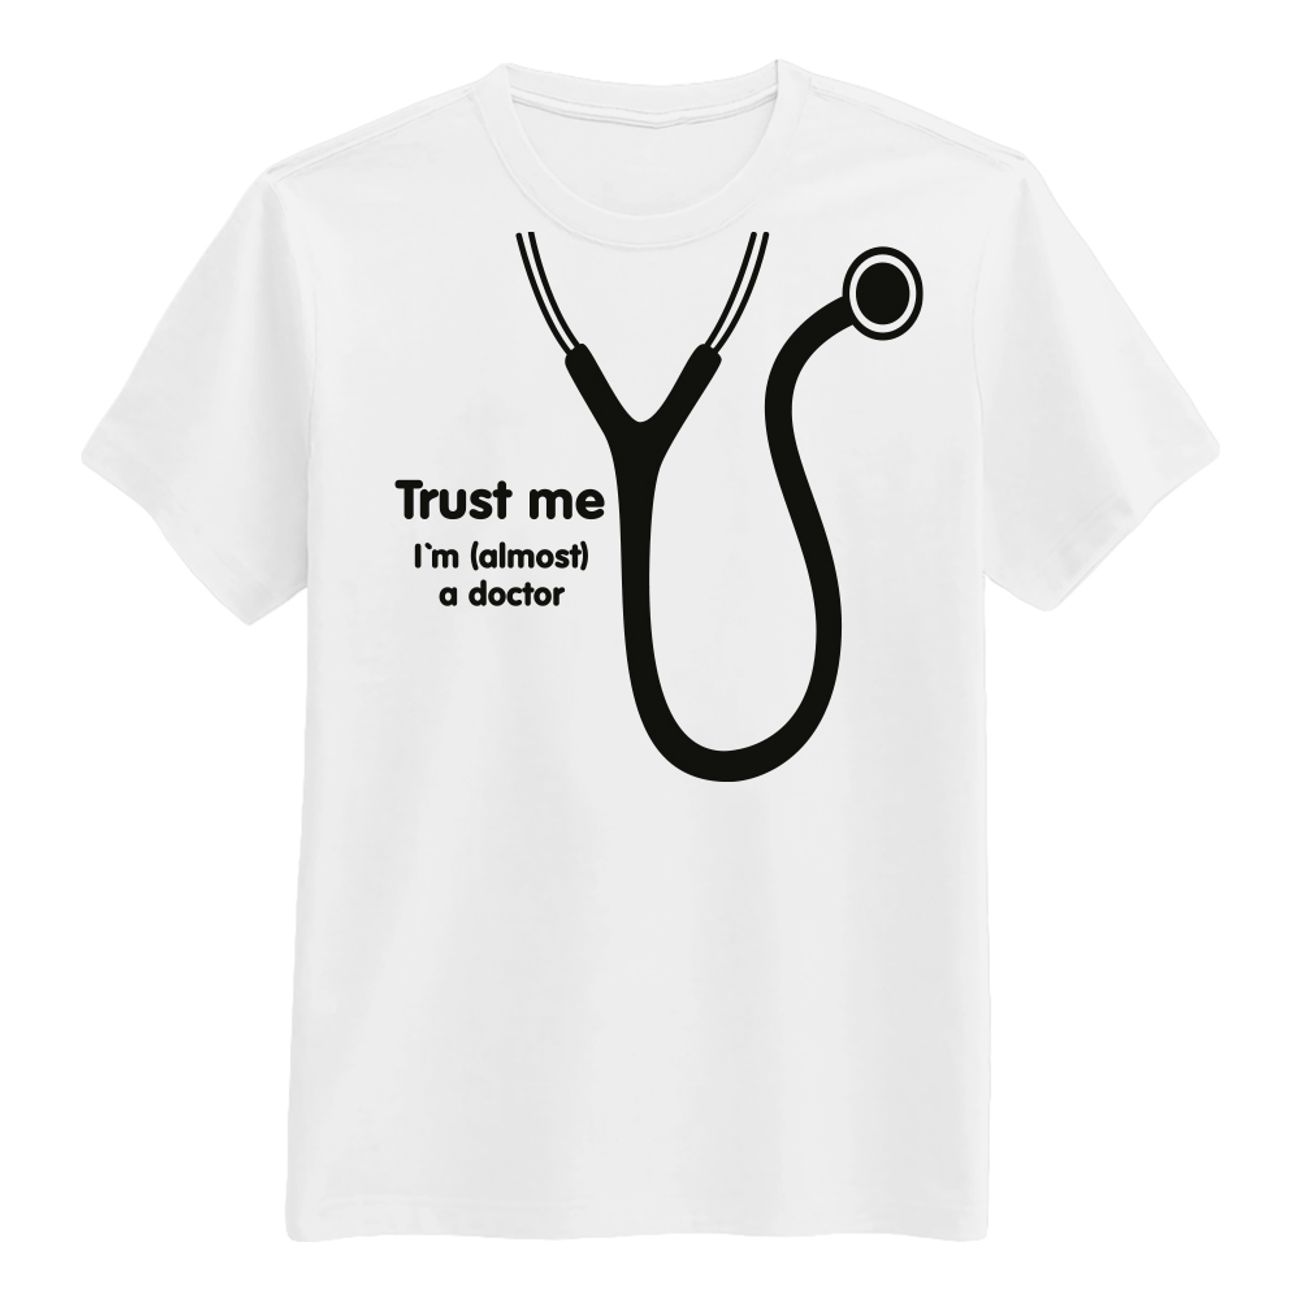 trust-me-im-almost-a-doctor-t-shirt-79387-1